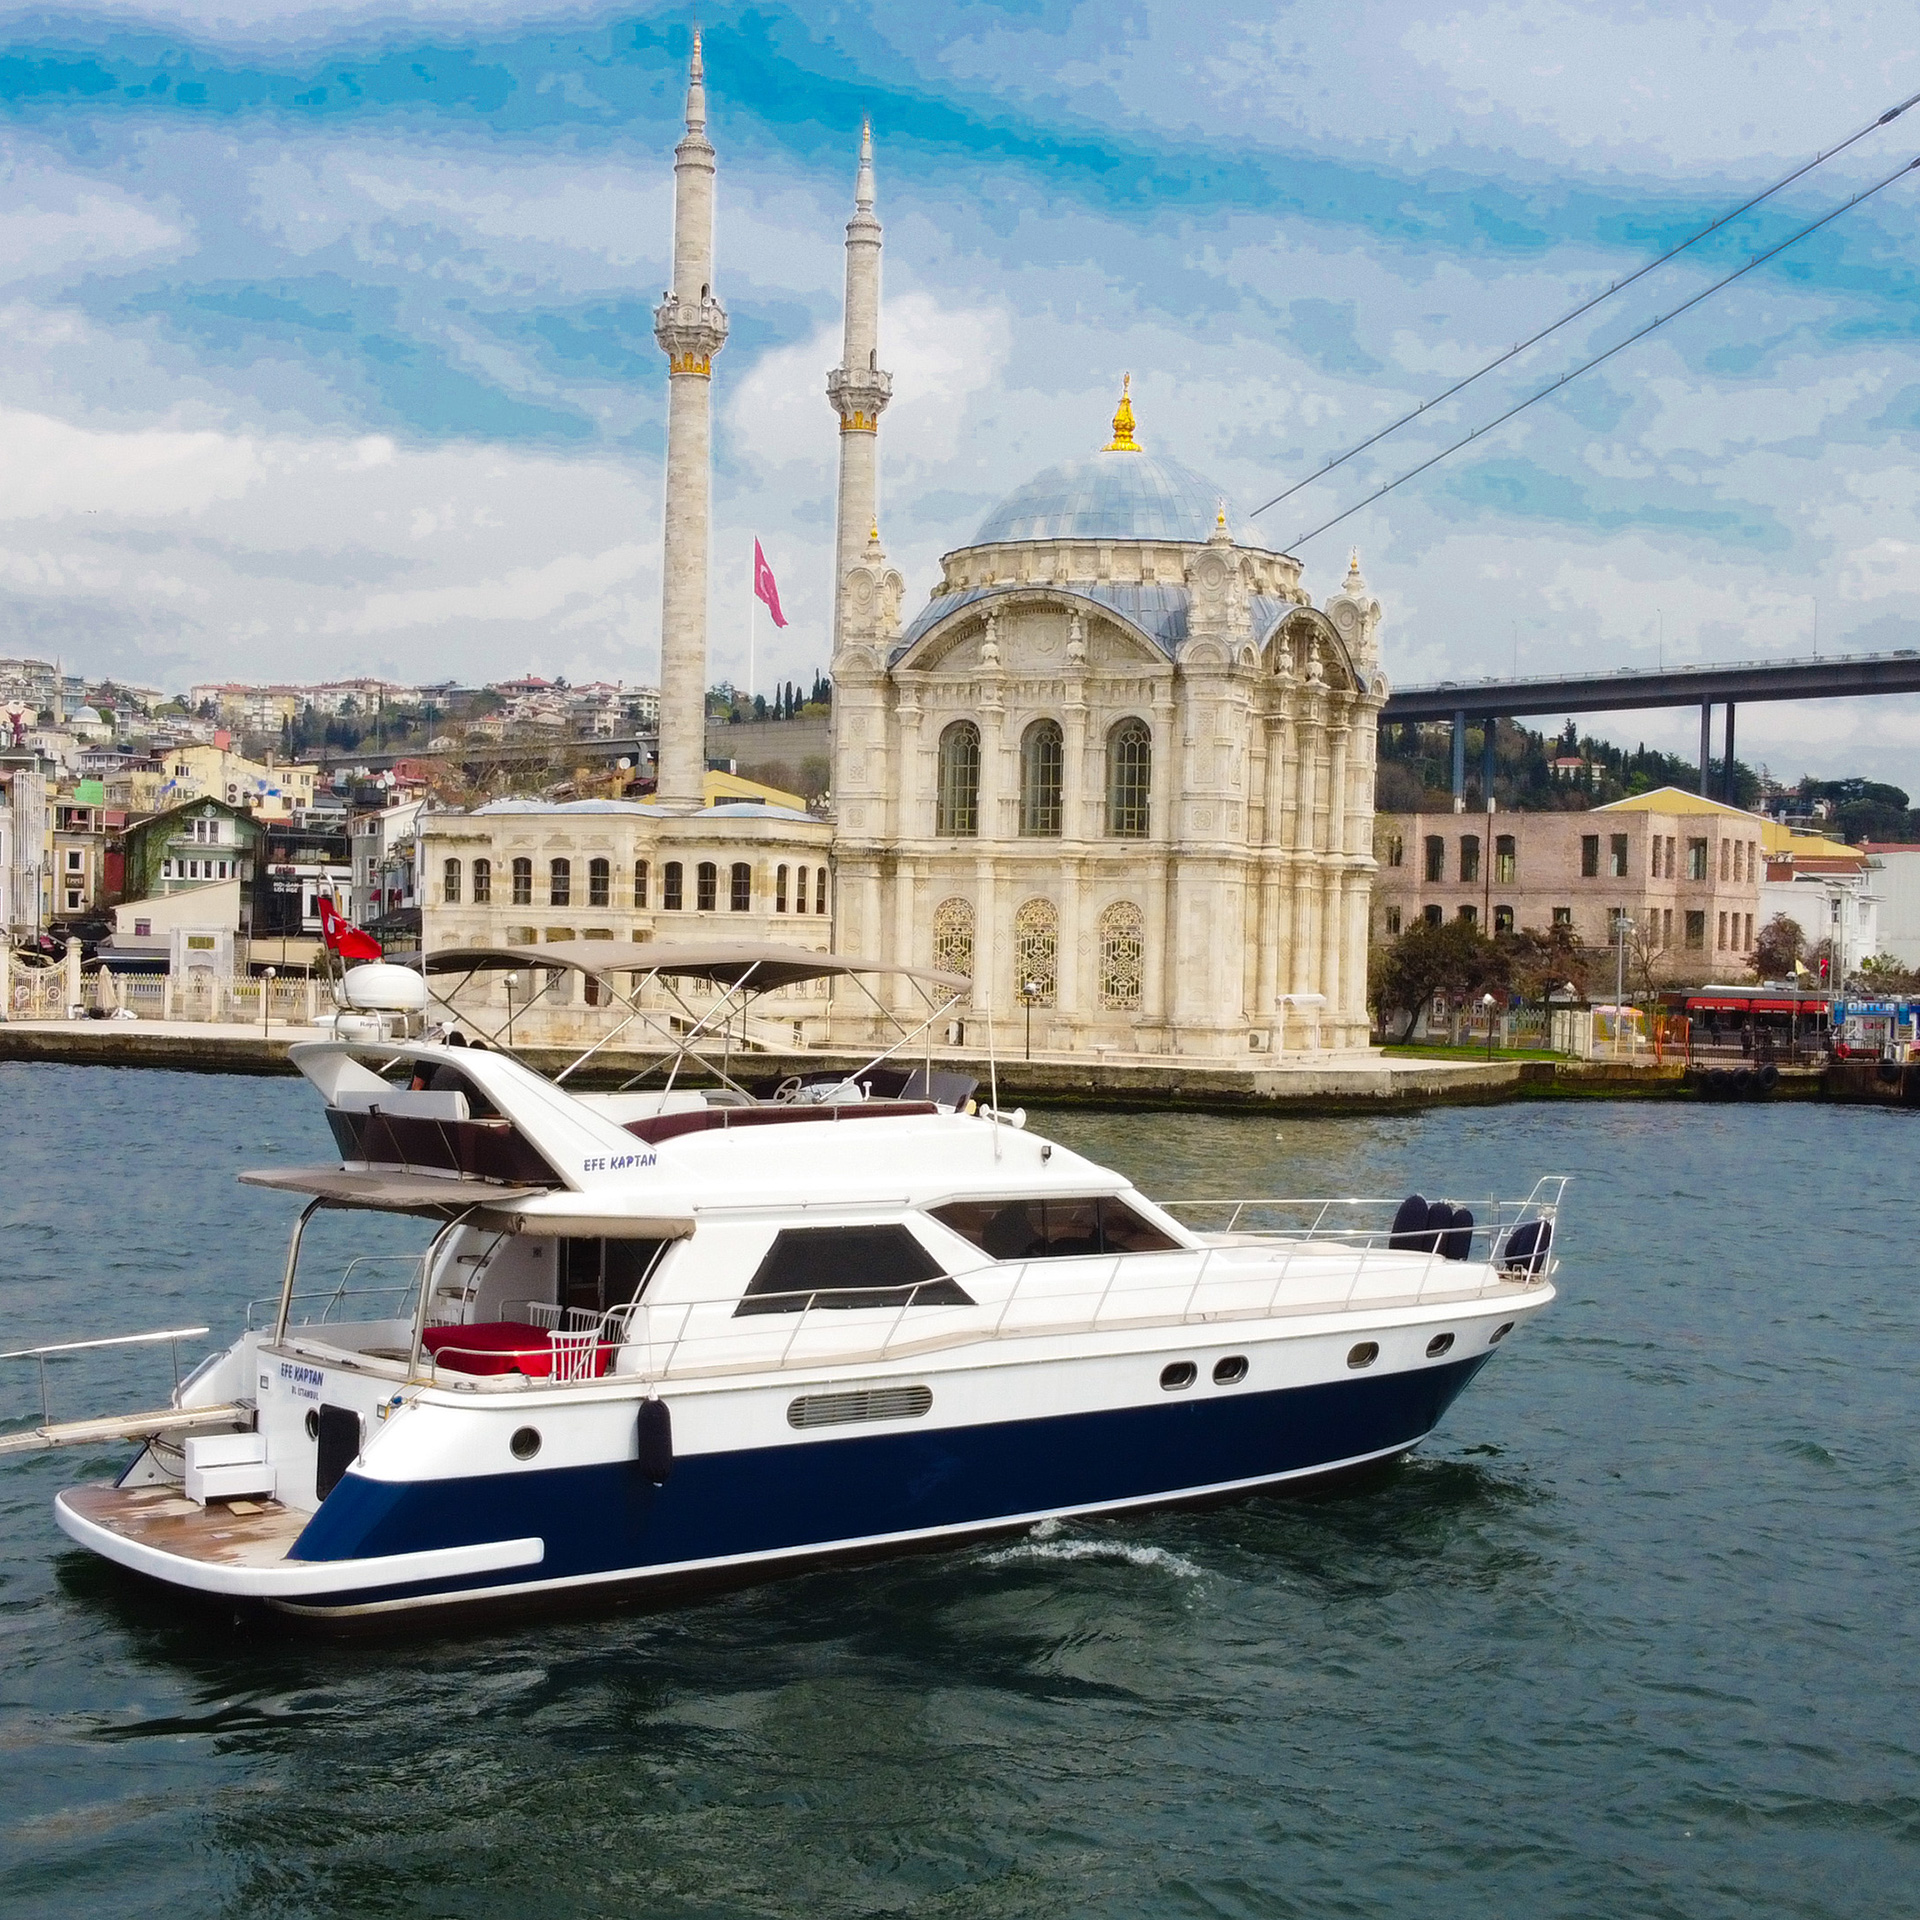 Bosphorus Cruise With Stopover In Asia Yacht Cruise